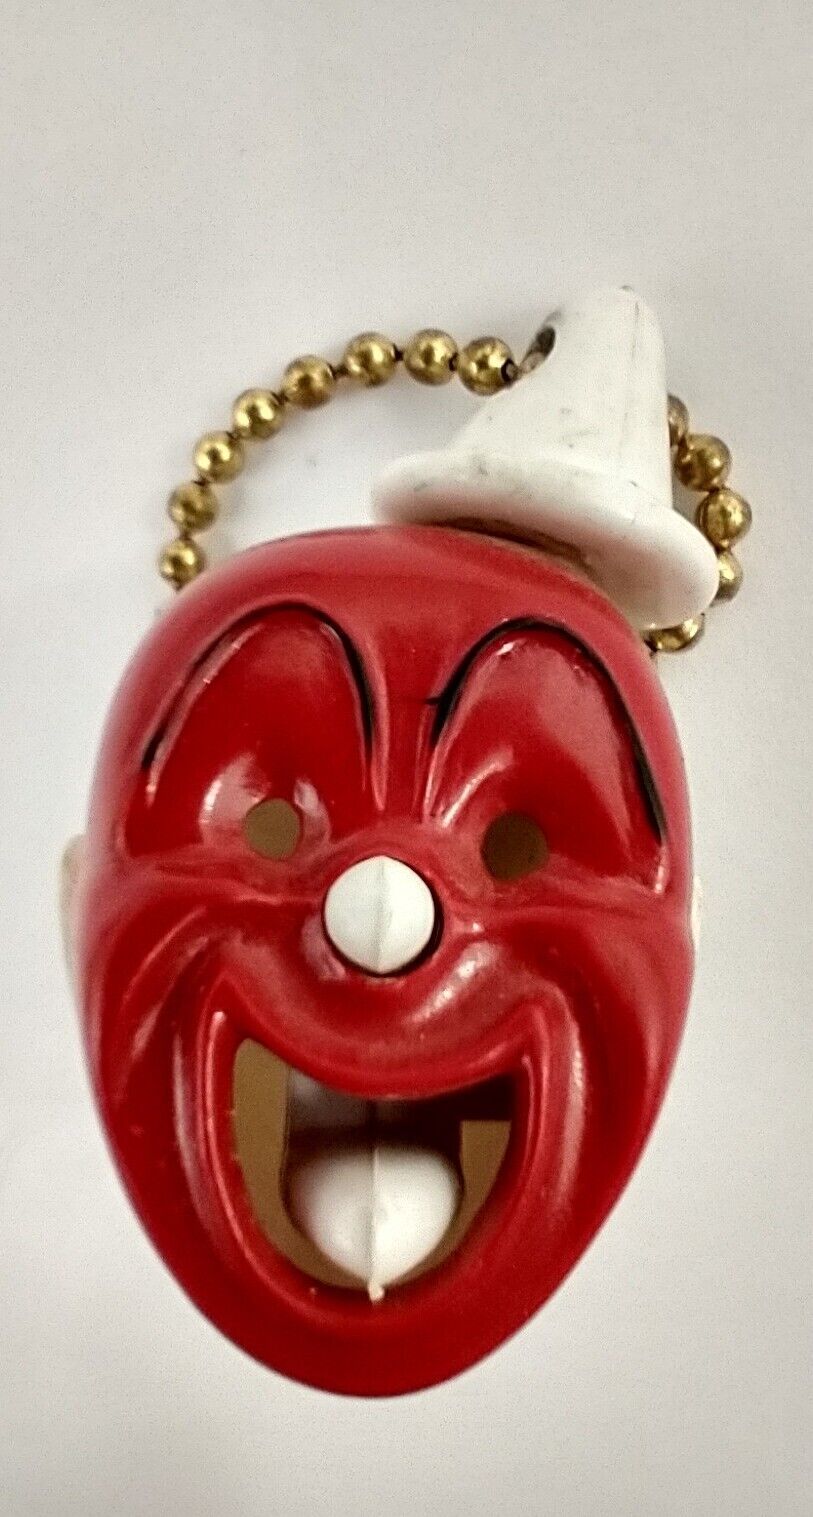 1940's - 50's Vintage Celluloid Clown Plastic Keychain w/ Popping Tongue & Nose